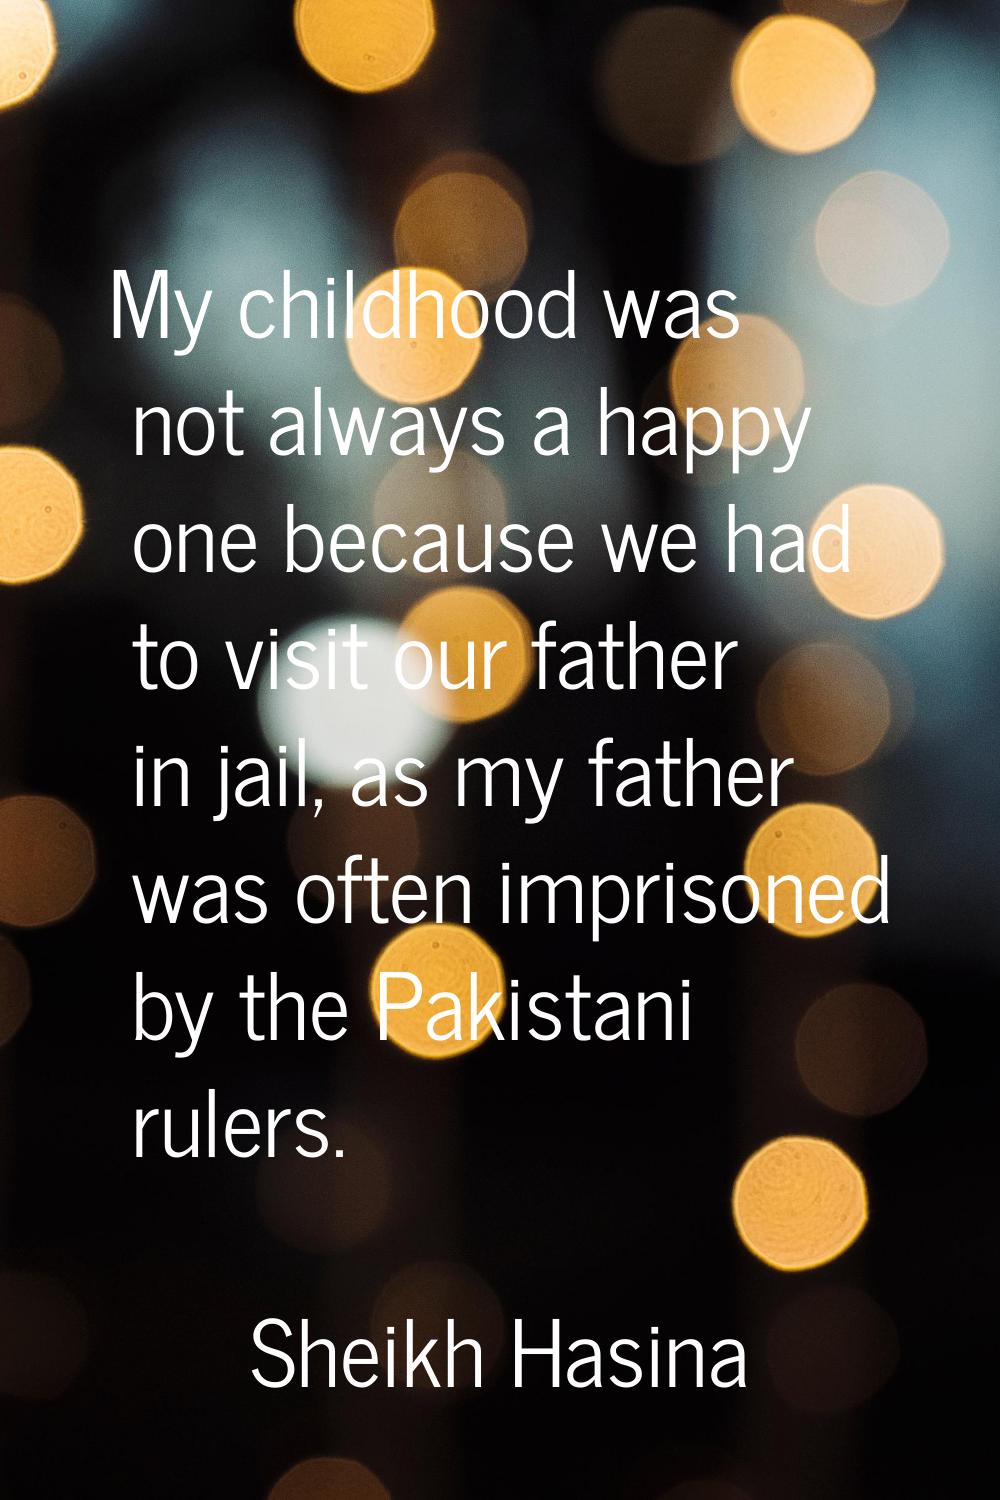 My childhood was not always a happy one because we had to visit our father in jail, as my father wa